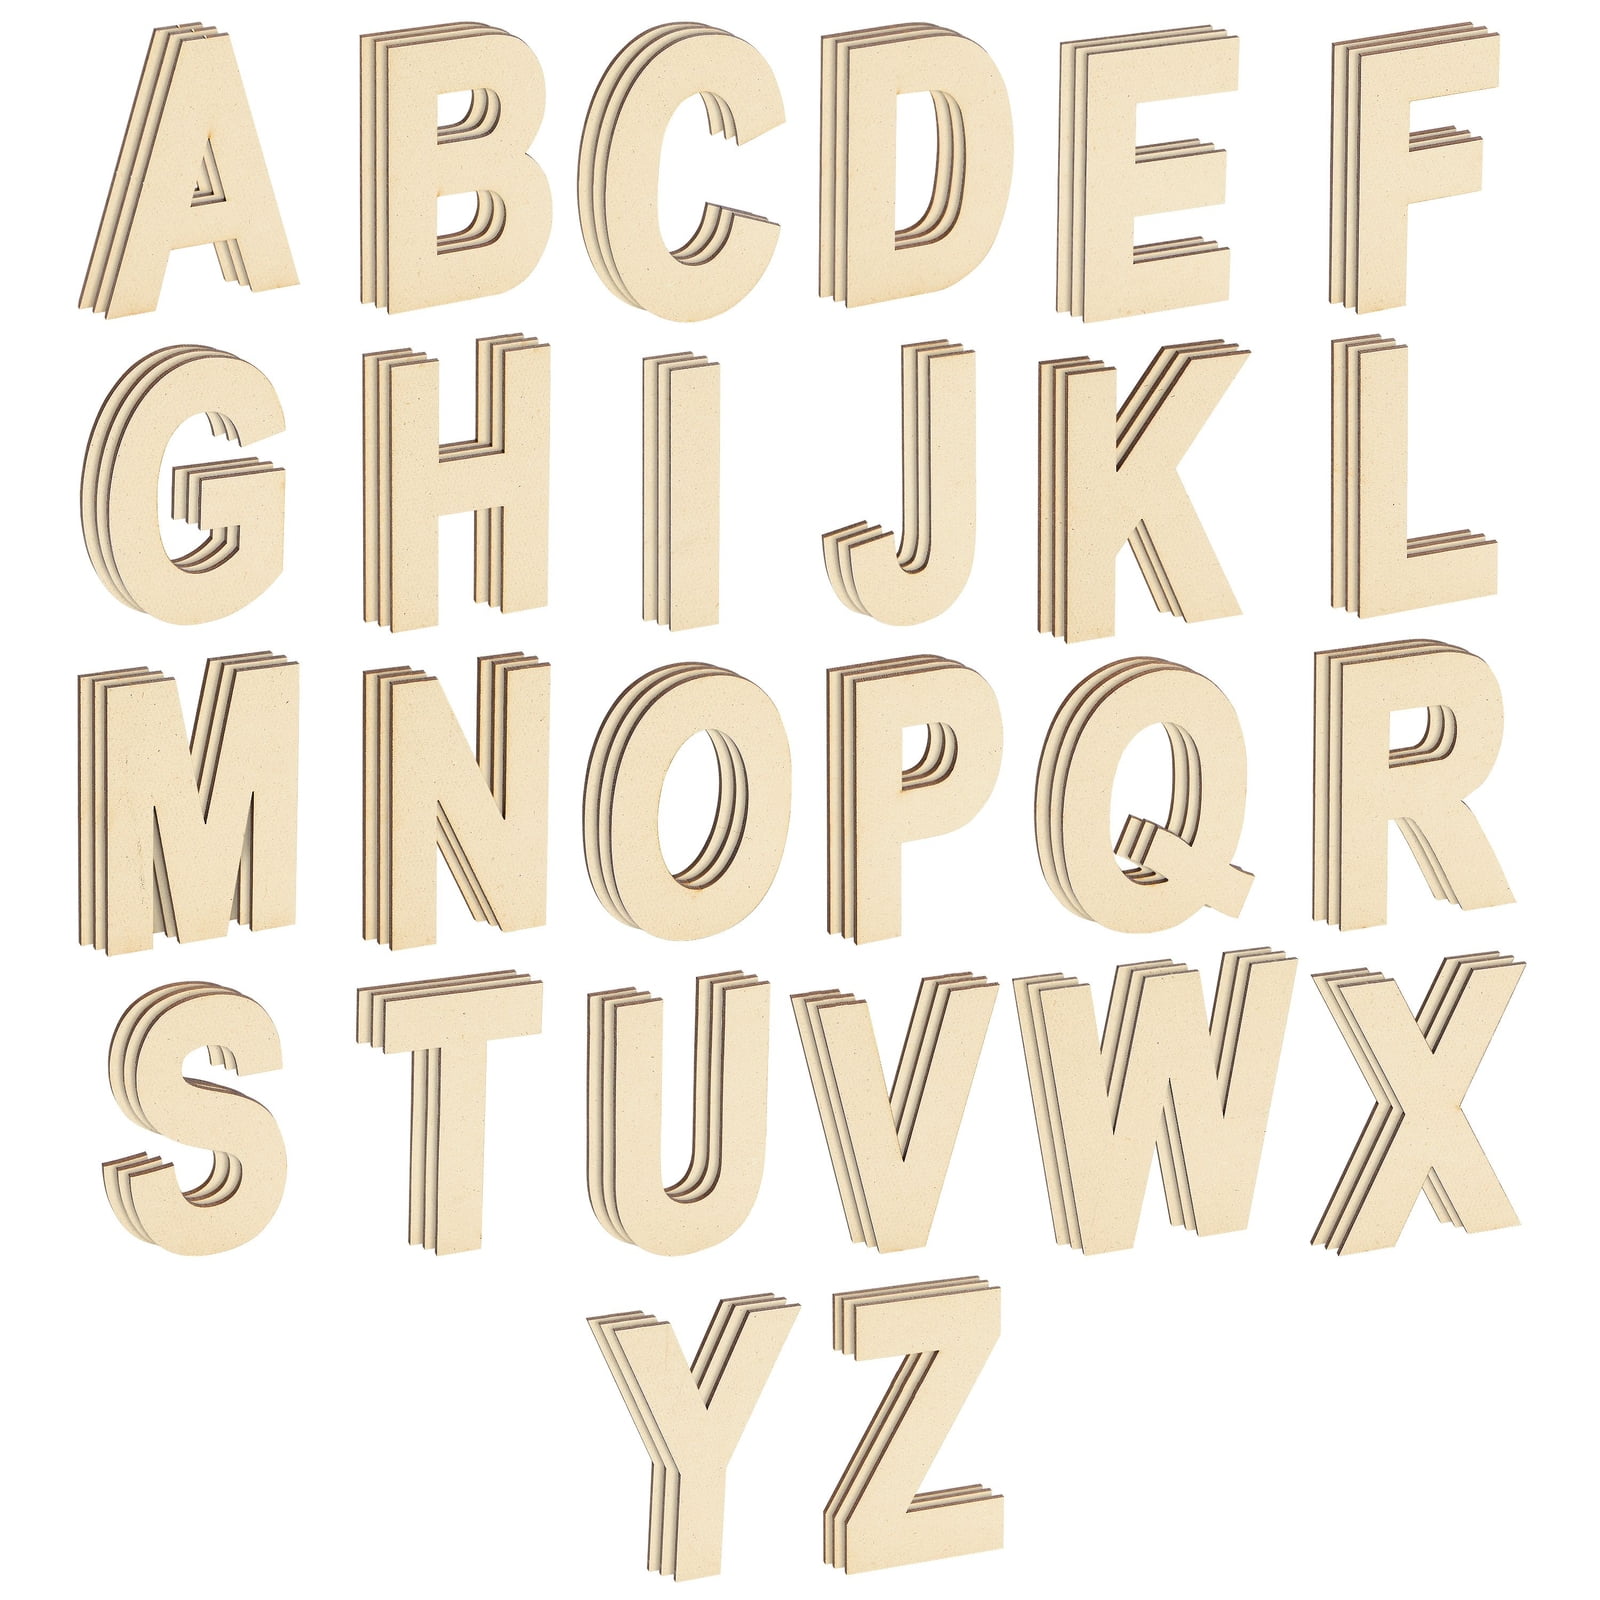 Wooden Letters & Numbers in Wood Crafting 